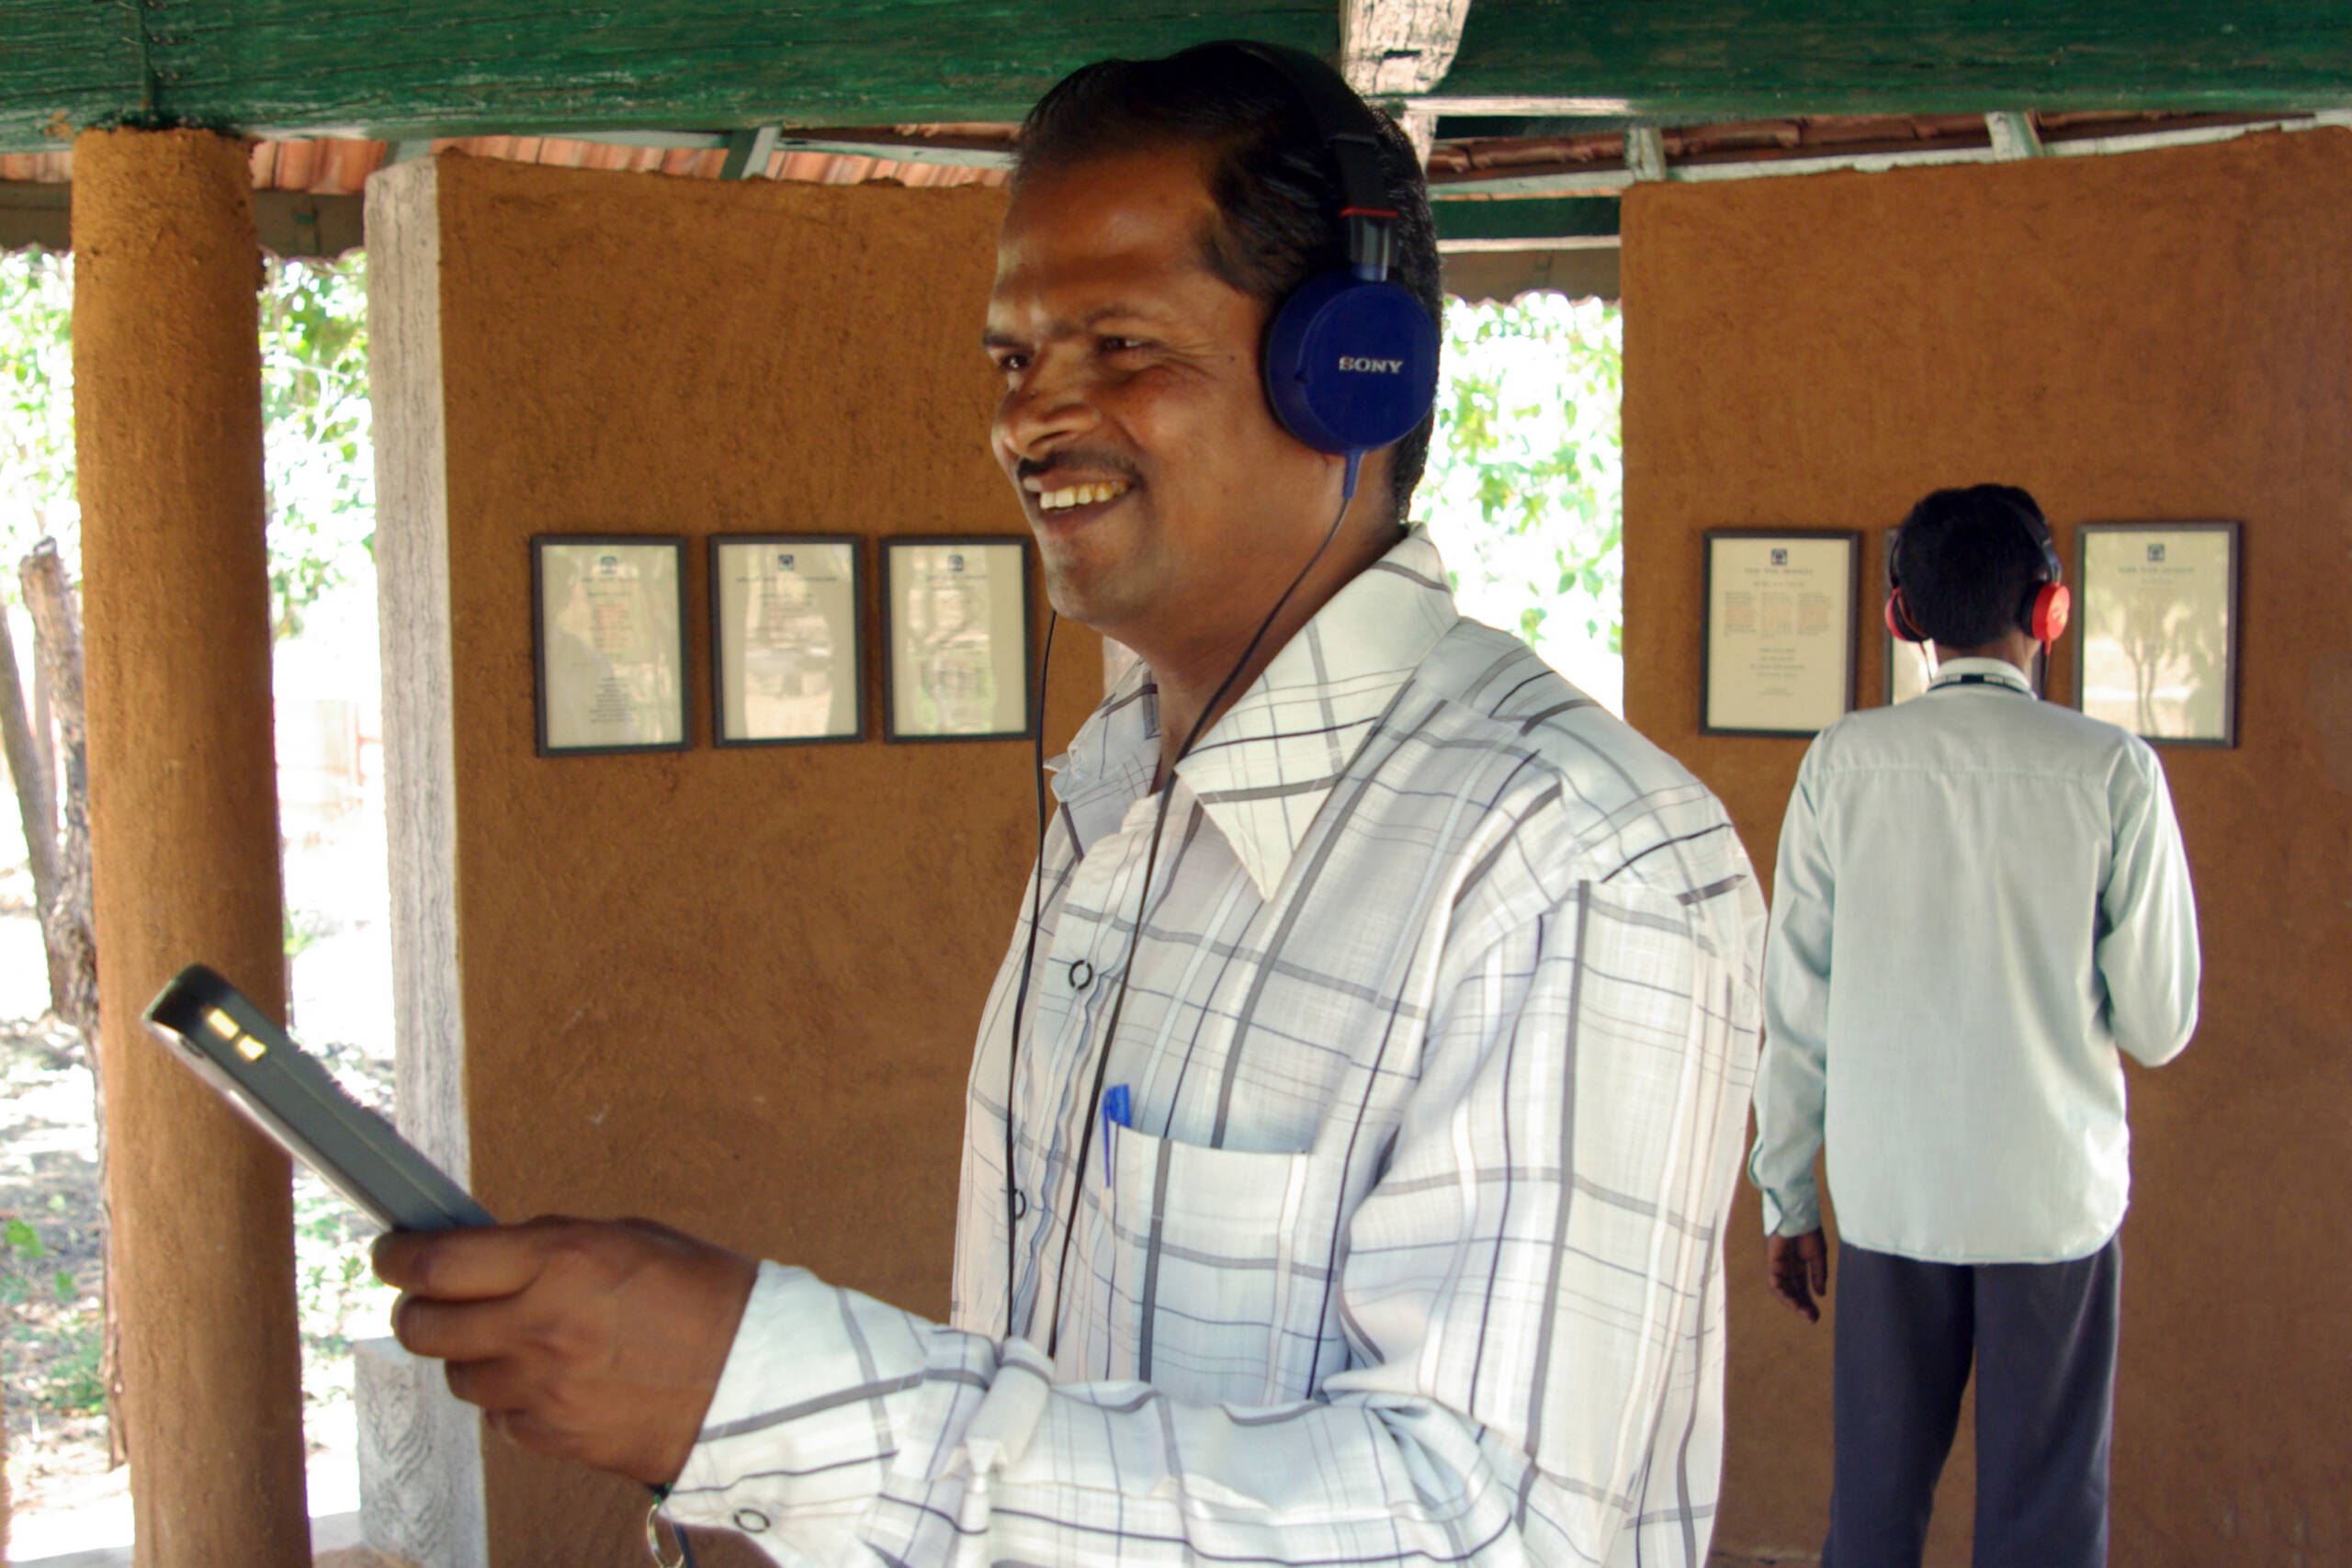 Visitors using audio guides available in English, Hindi and Gujarati languages